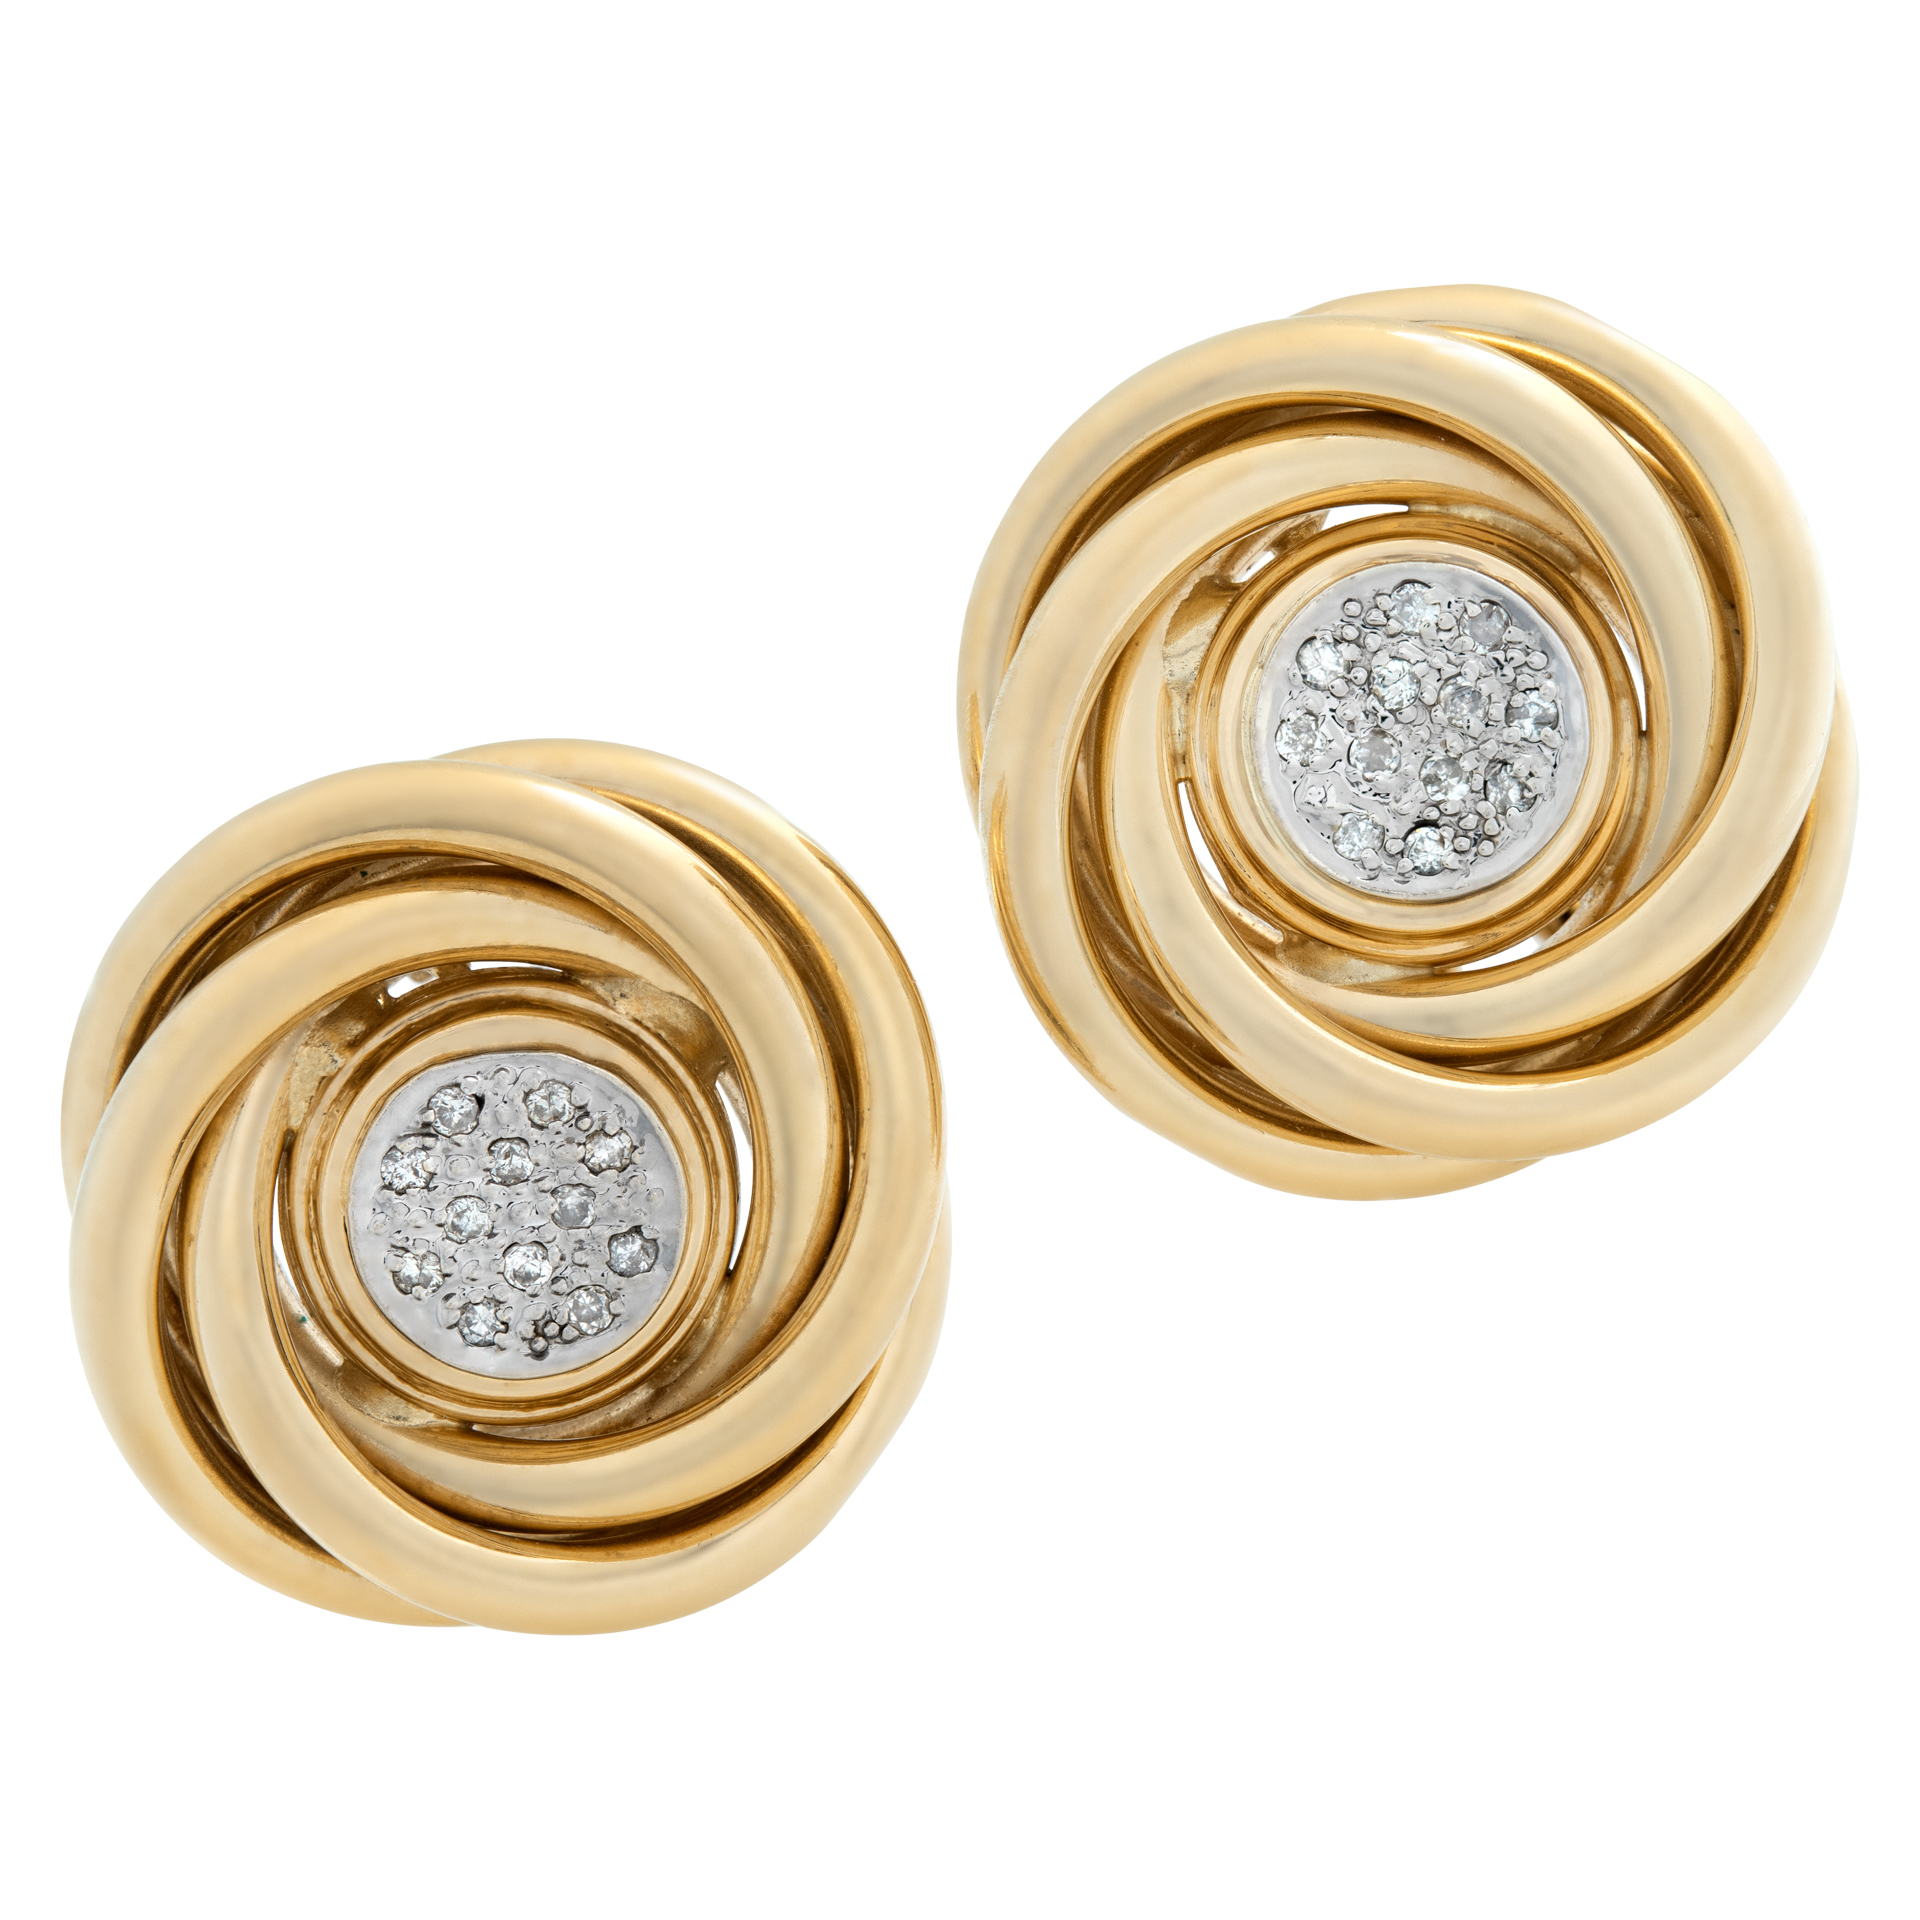 Classic Knot earrings with pave diamonds center, set in 14K yellow gold. 20mm diameter.